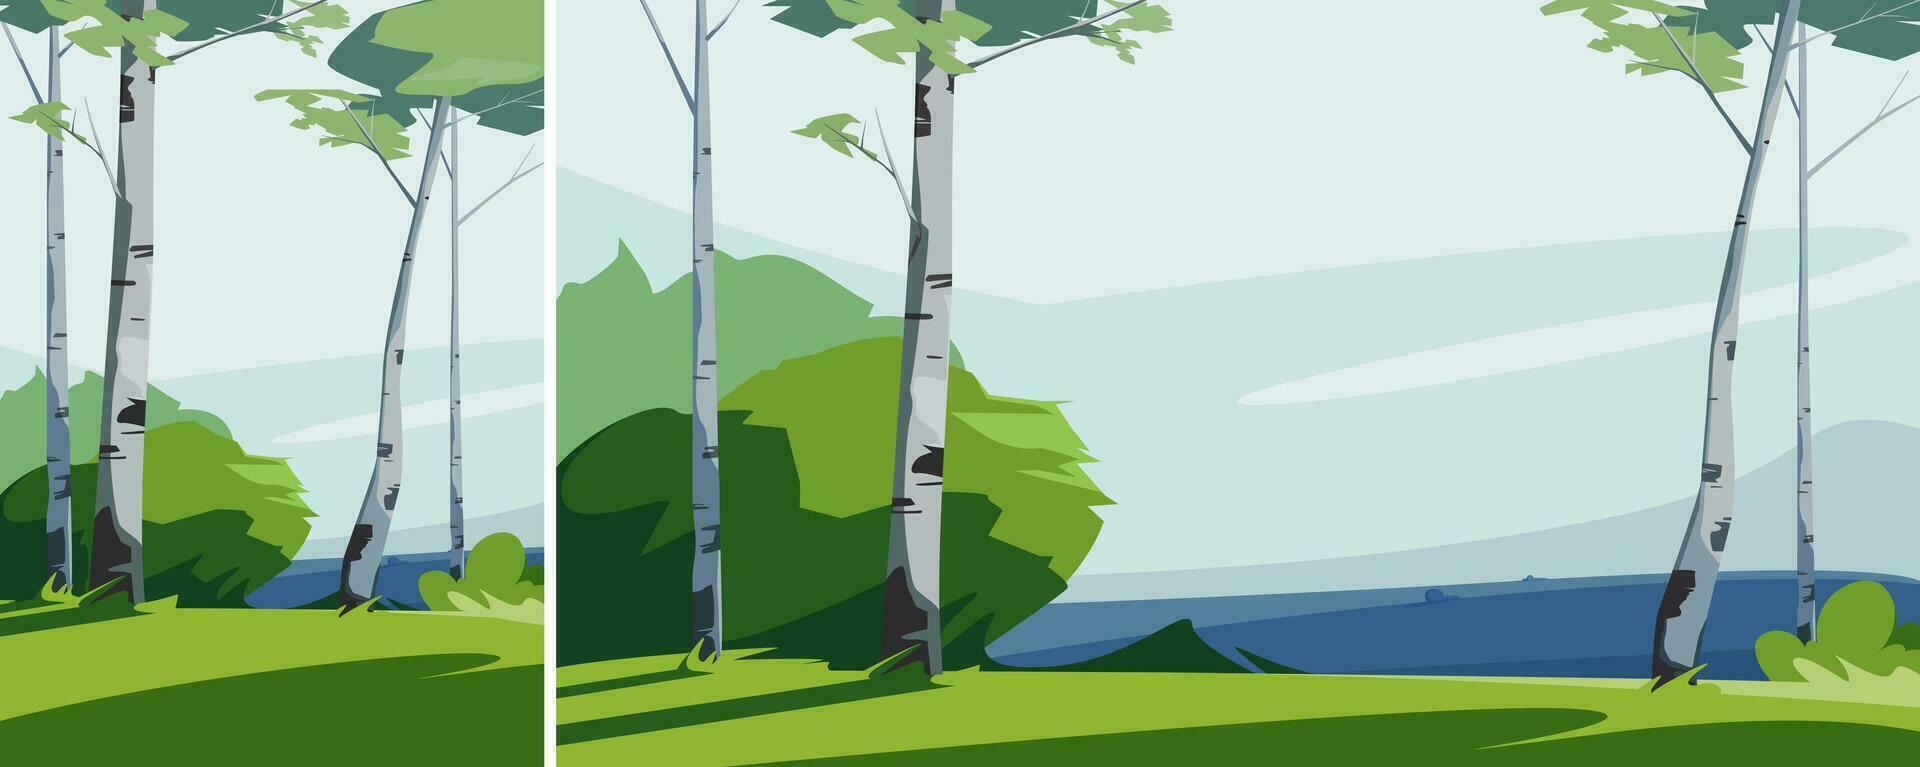 Landscape with birches. Natural scenery in different formats. vector